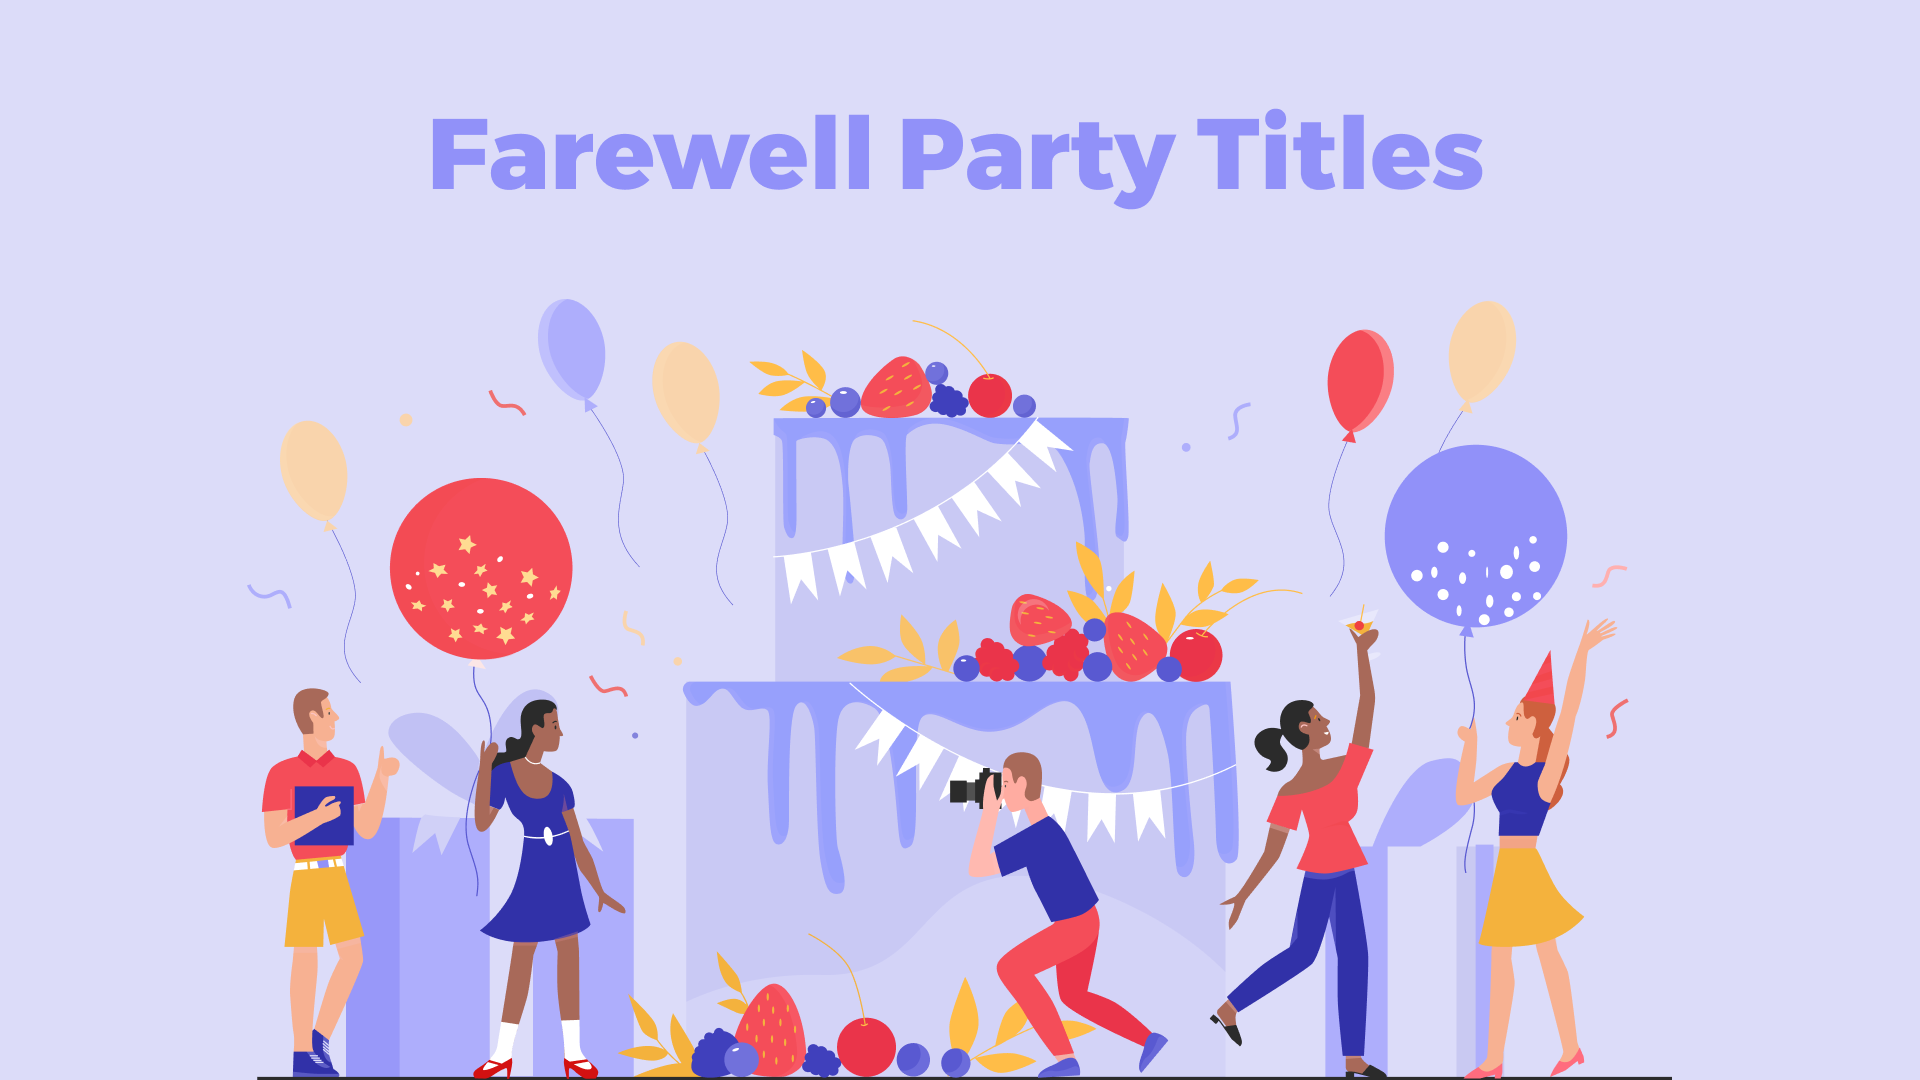 Farewell Party Titles